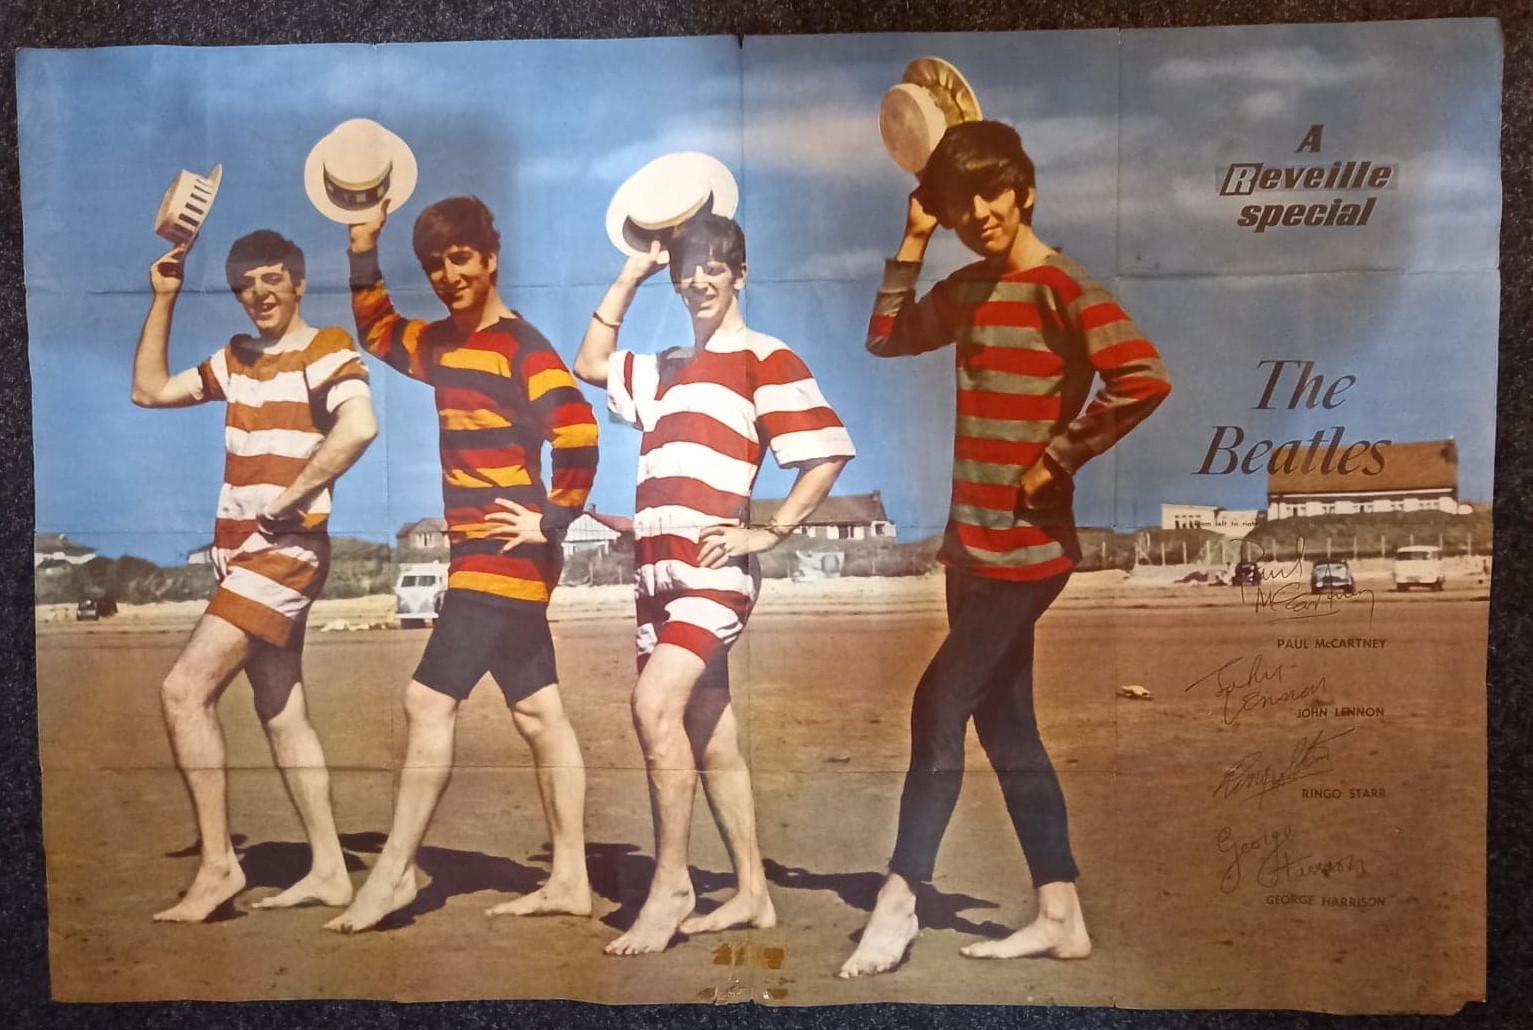 The Beatles Reveille Special Poster measures approx 60” x 40”